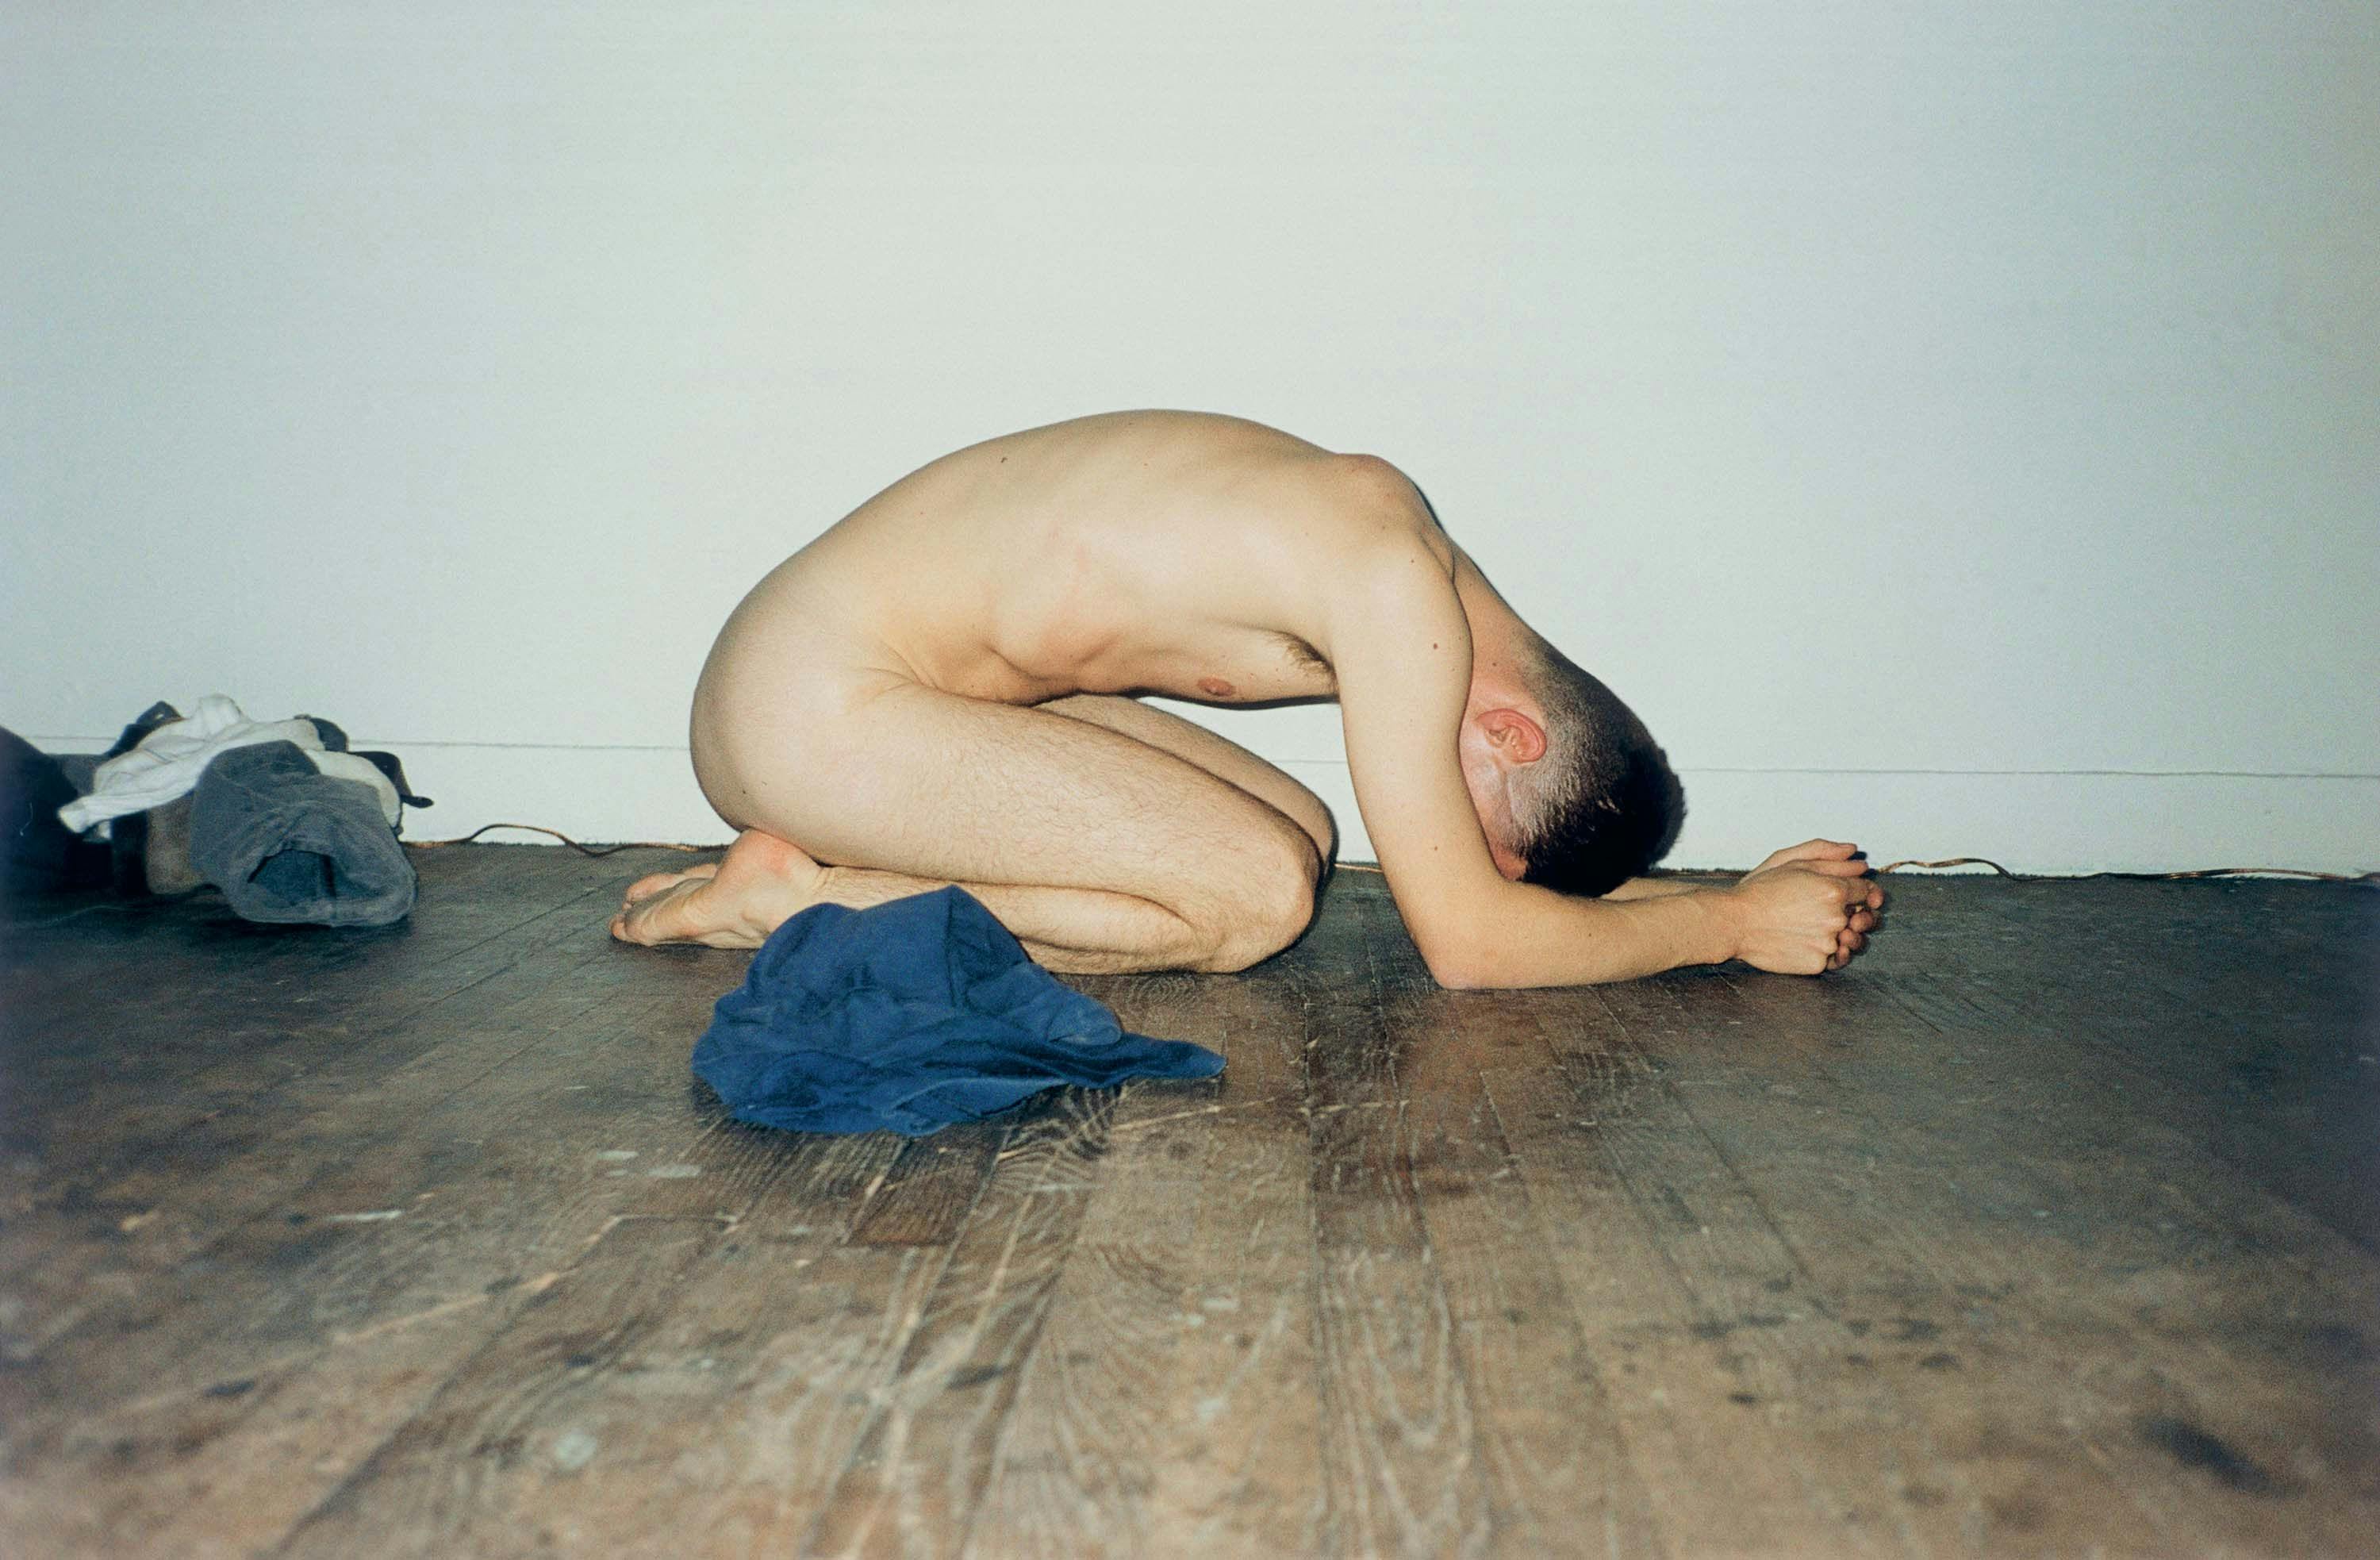 An Inkjet print on paper by Wolfgang Tillmans, titled like praying II, dated 1994.